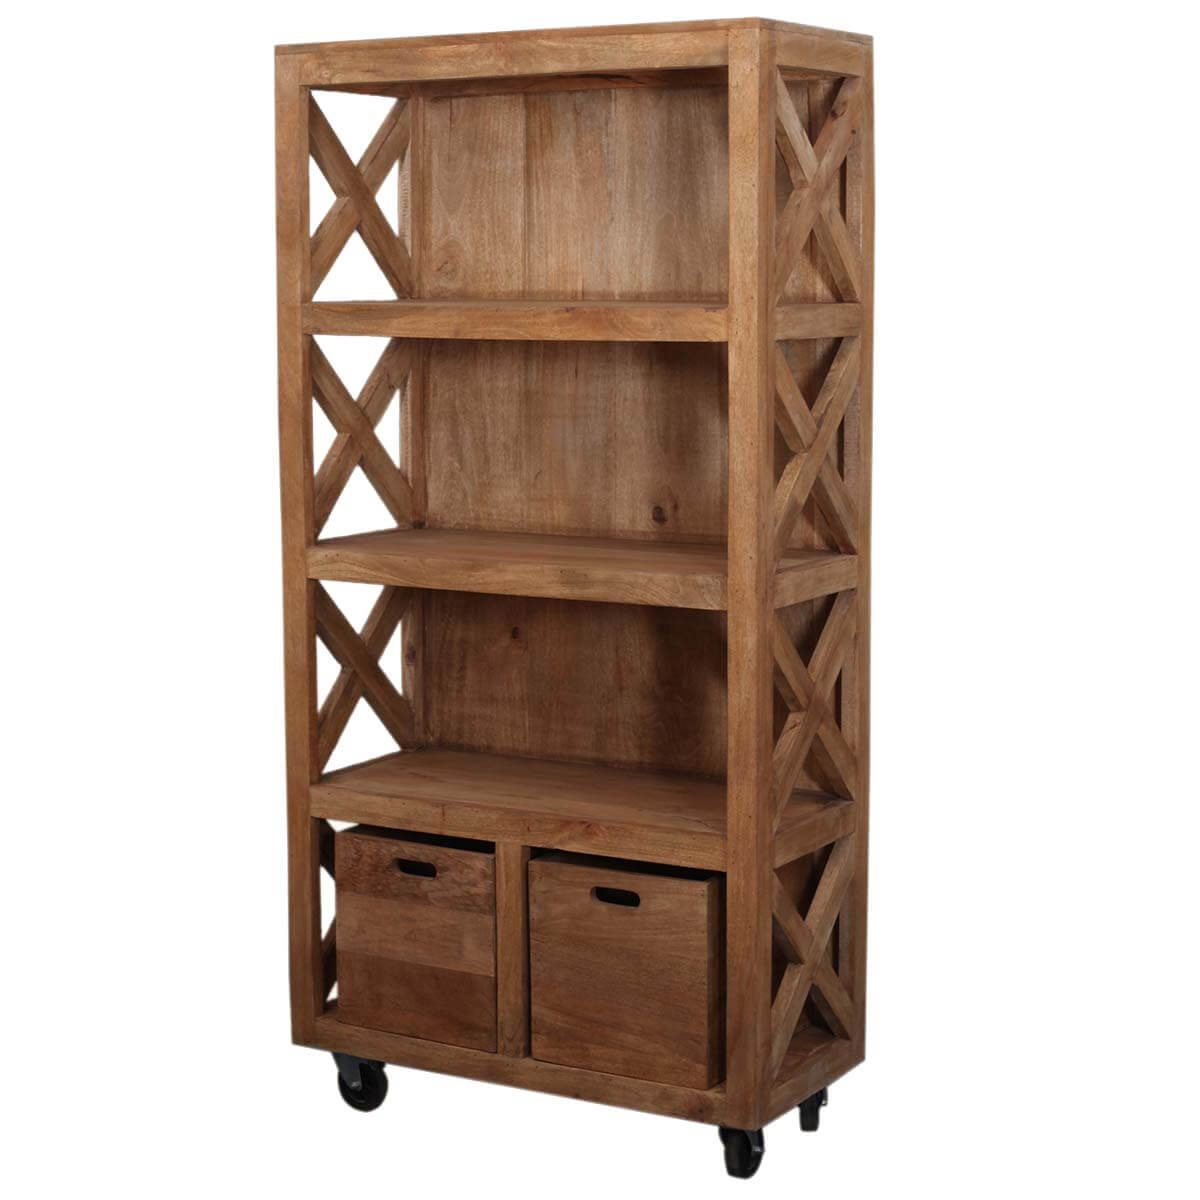 Dinuba 4 Open Shelf Modern Rustic Solid Wood Bookcase pertaining to proportions 1200 X 1200